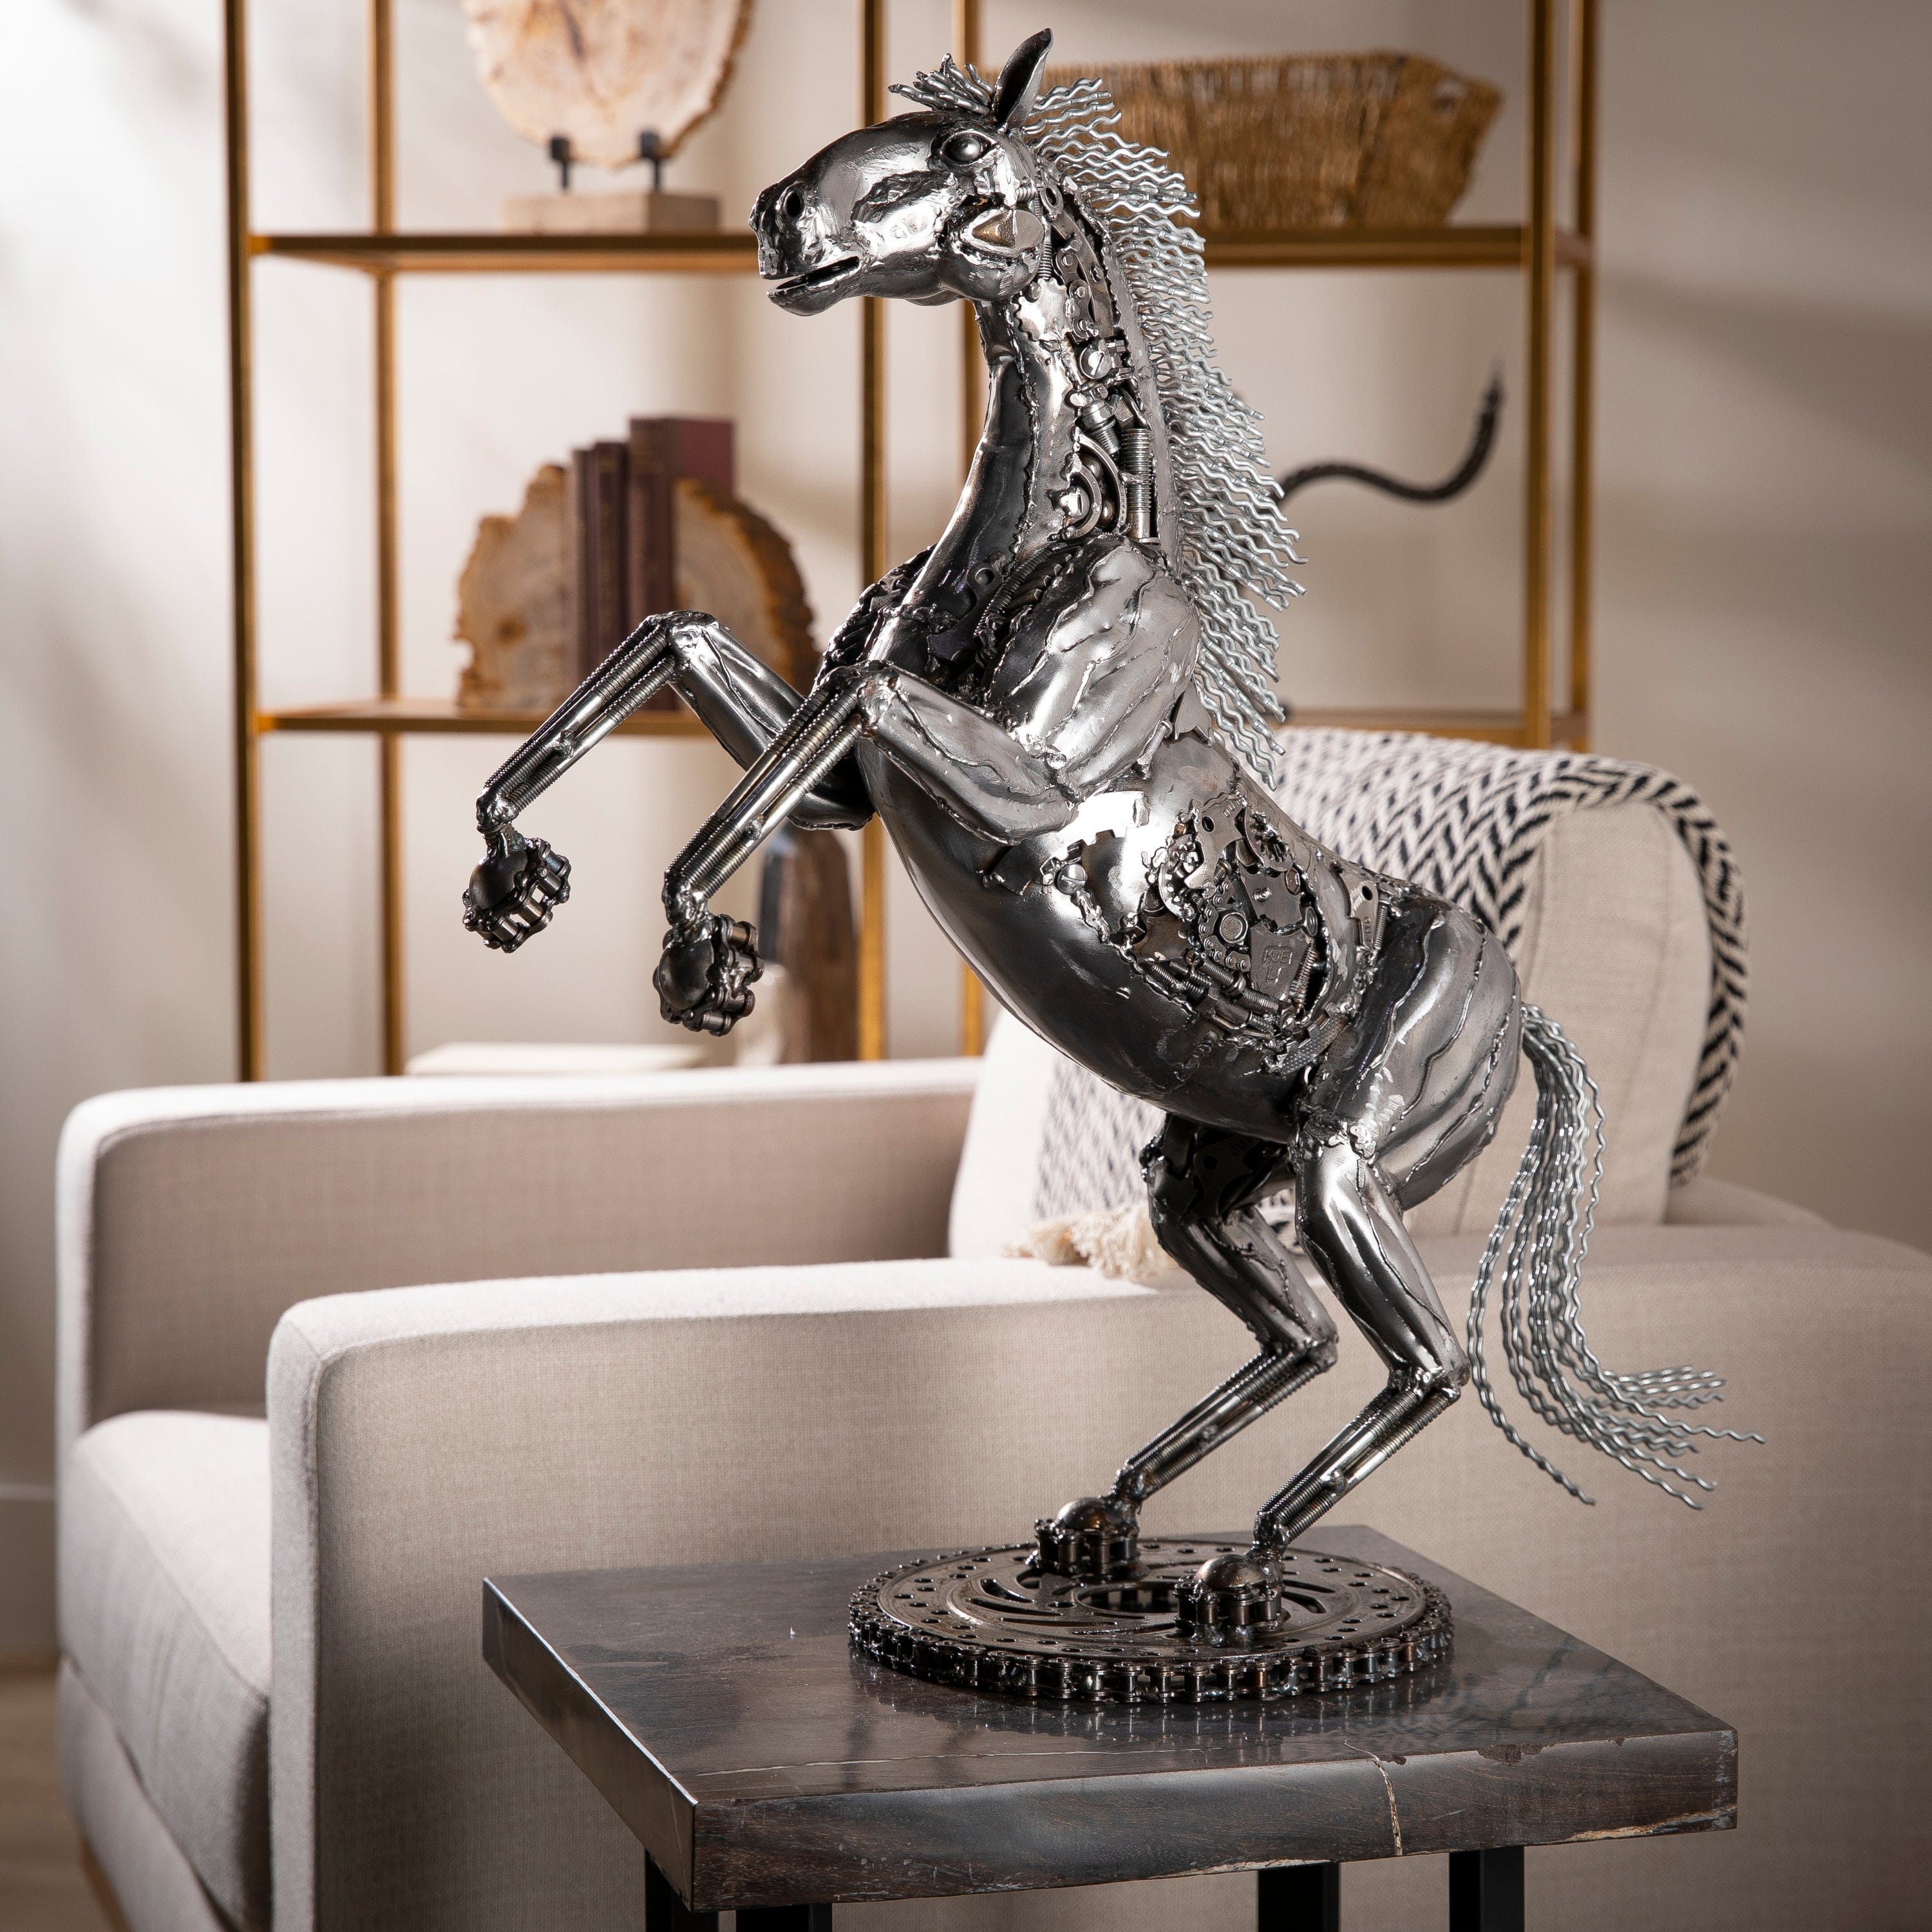 KALIFANO Recycled Metal Art 24" Jumping Horse Inspired Recycled Metal Art Sculpture RMS-JHS74x53-PK